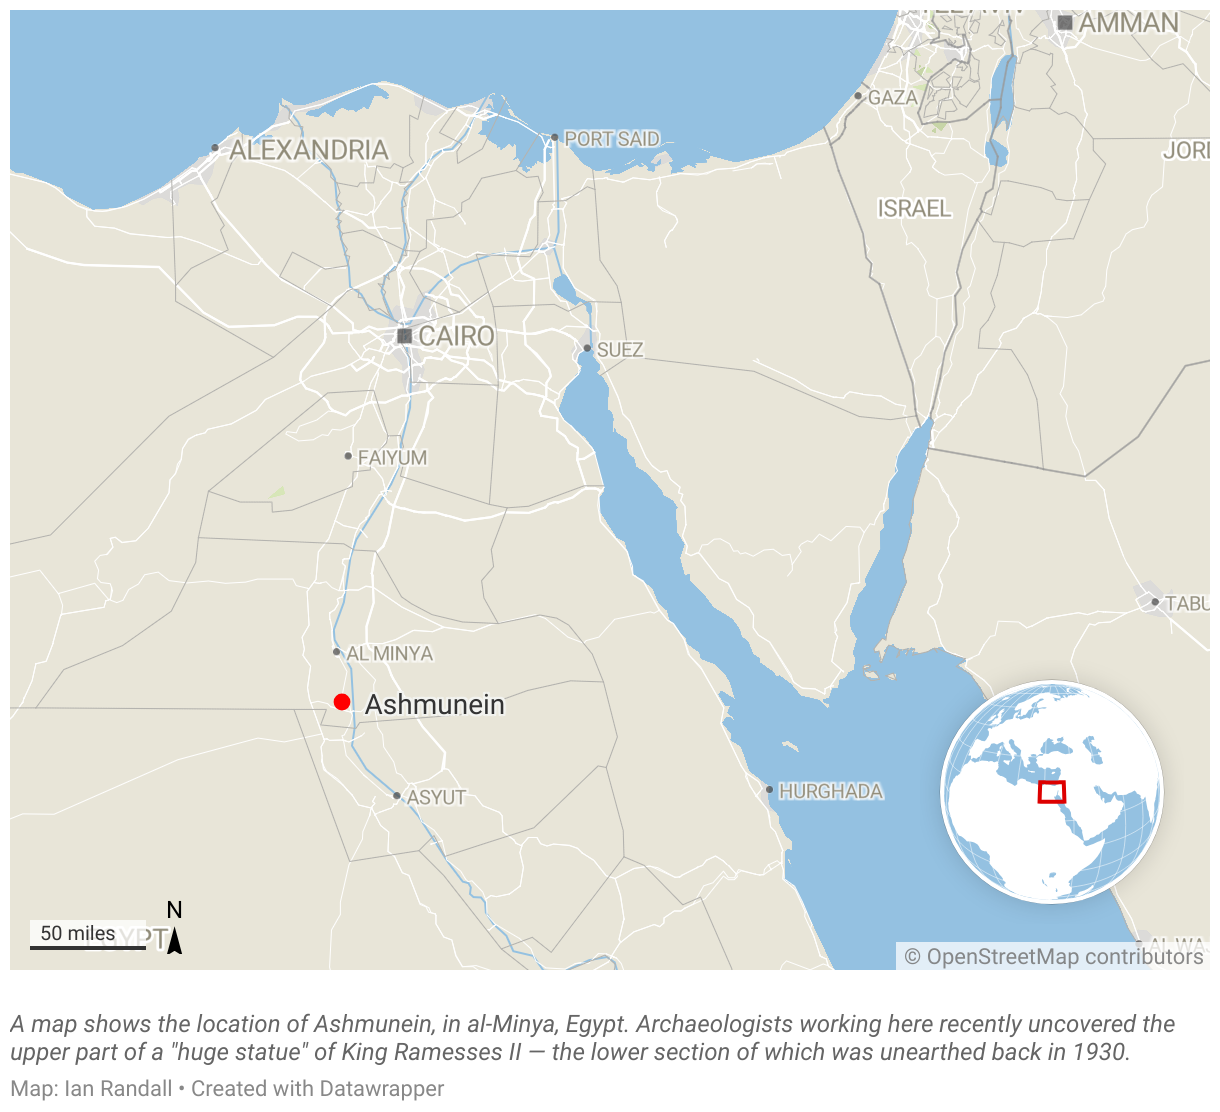 A maps shows the location of Ashmunein, in al-Minya, Egypt.